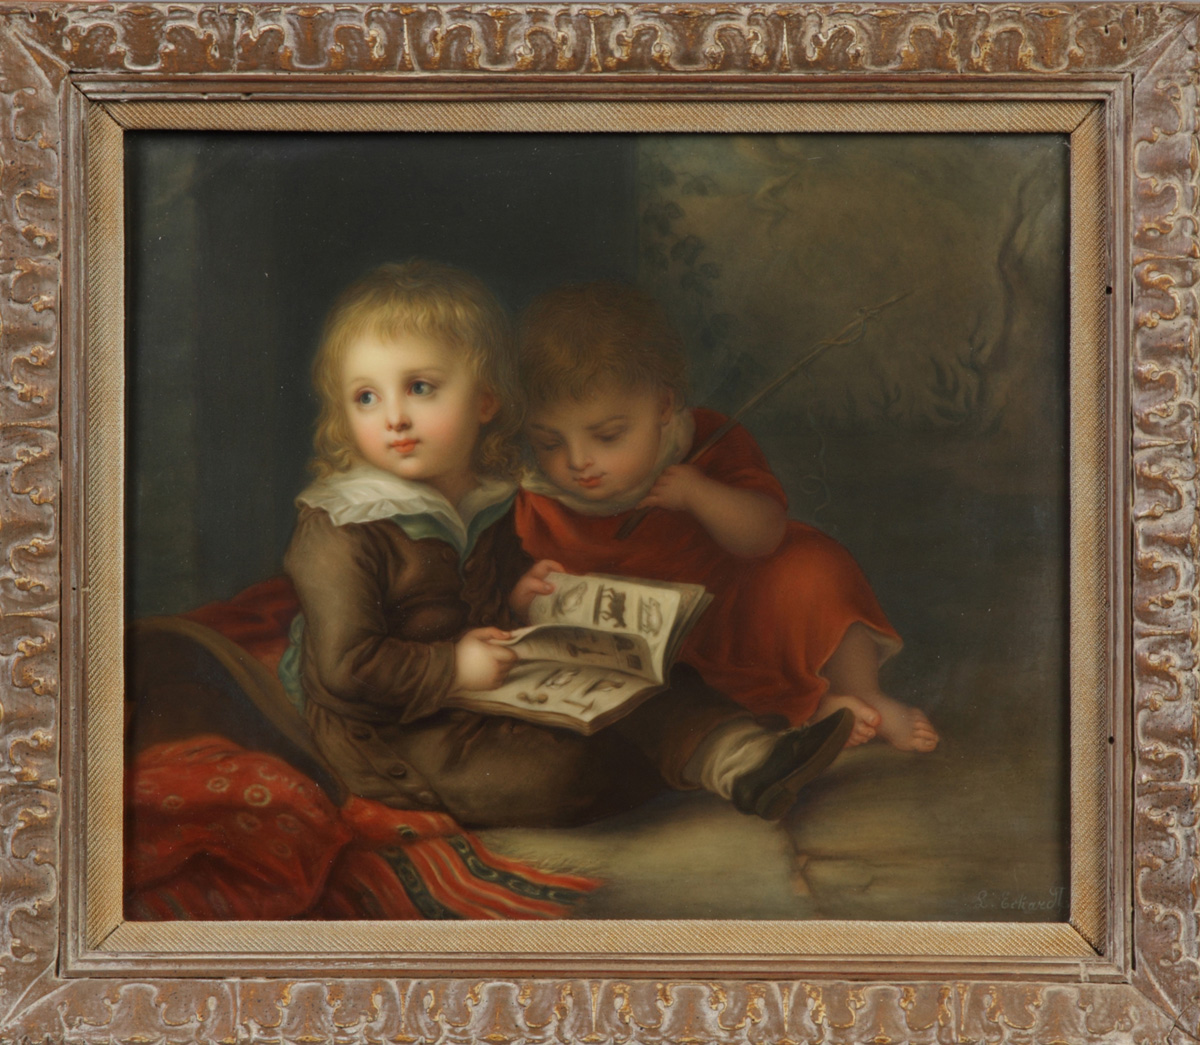 Sgn. KPM Plaque of Two children